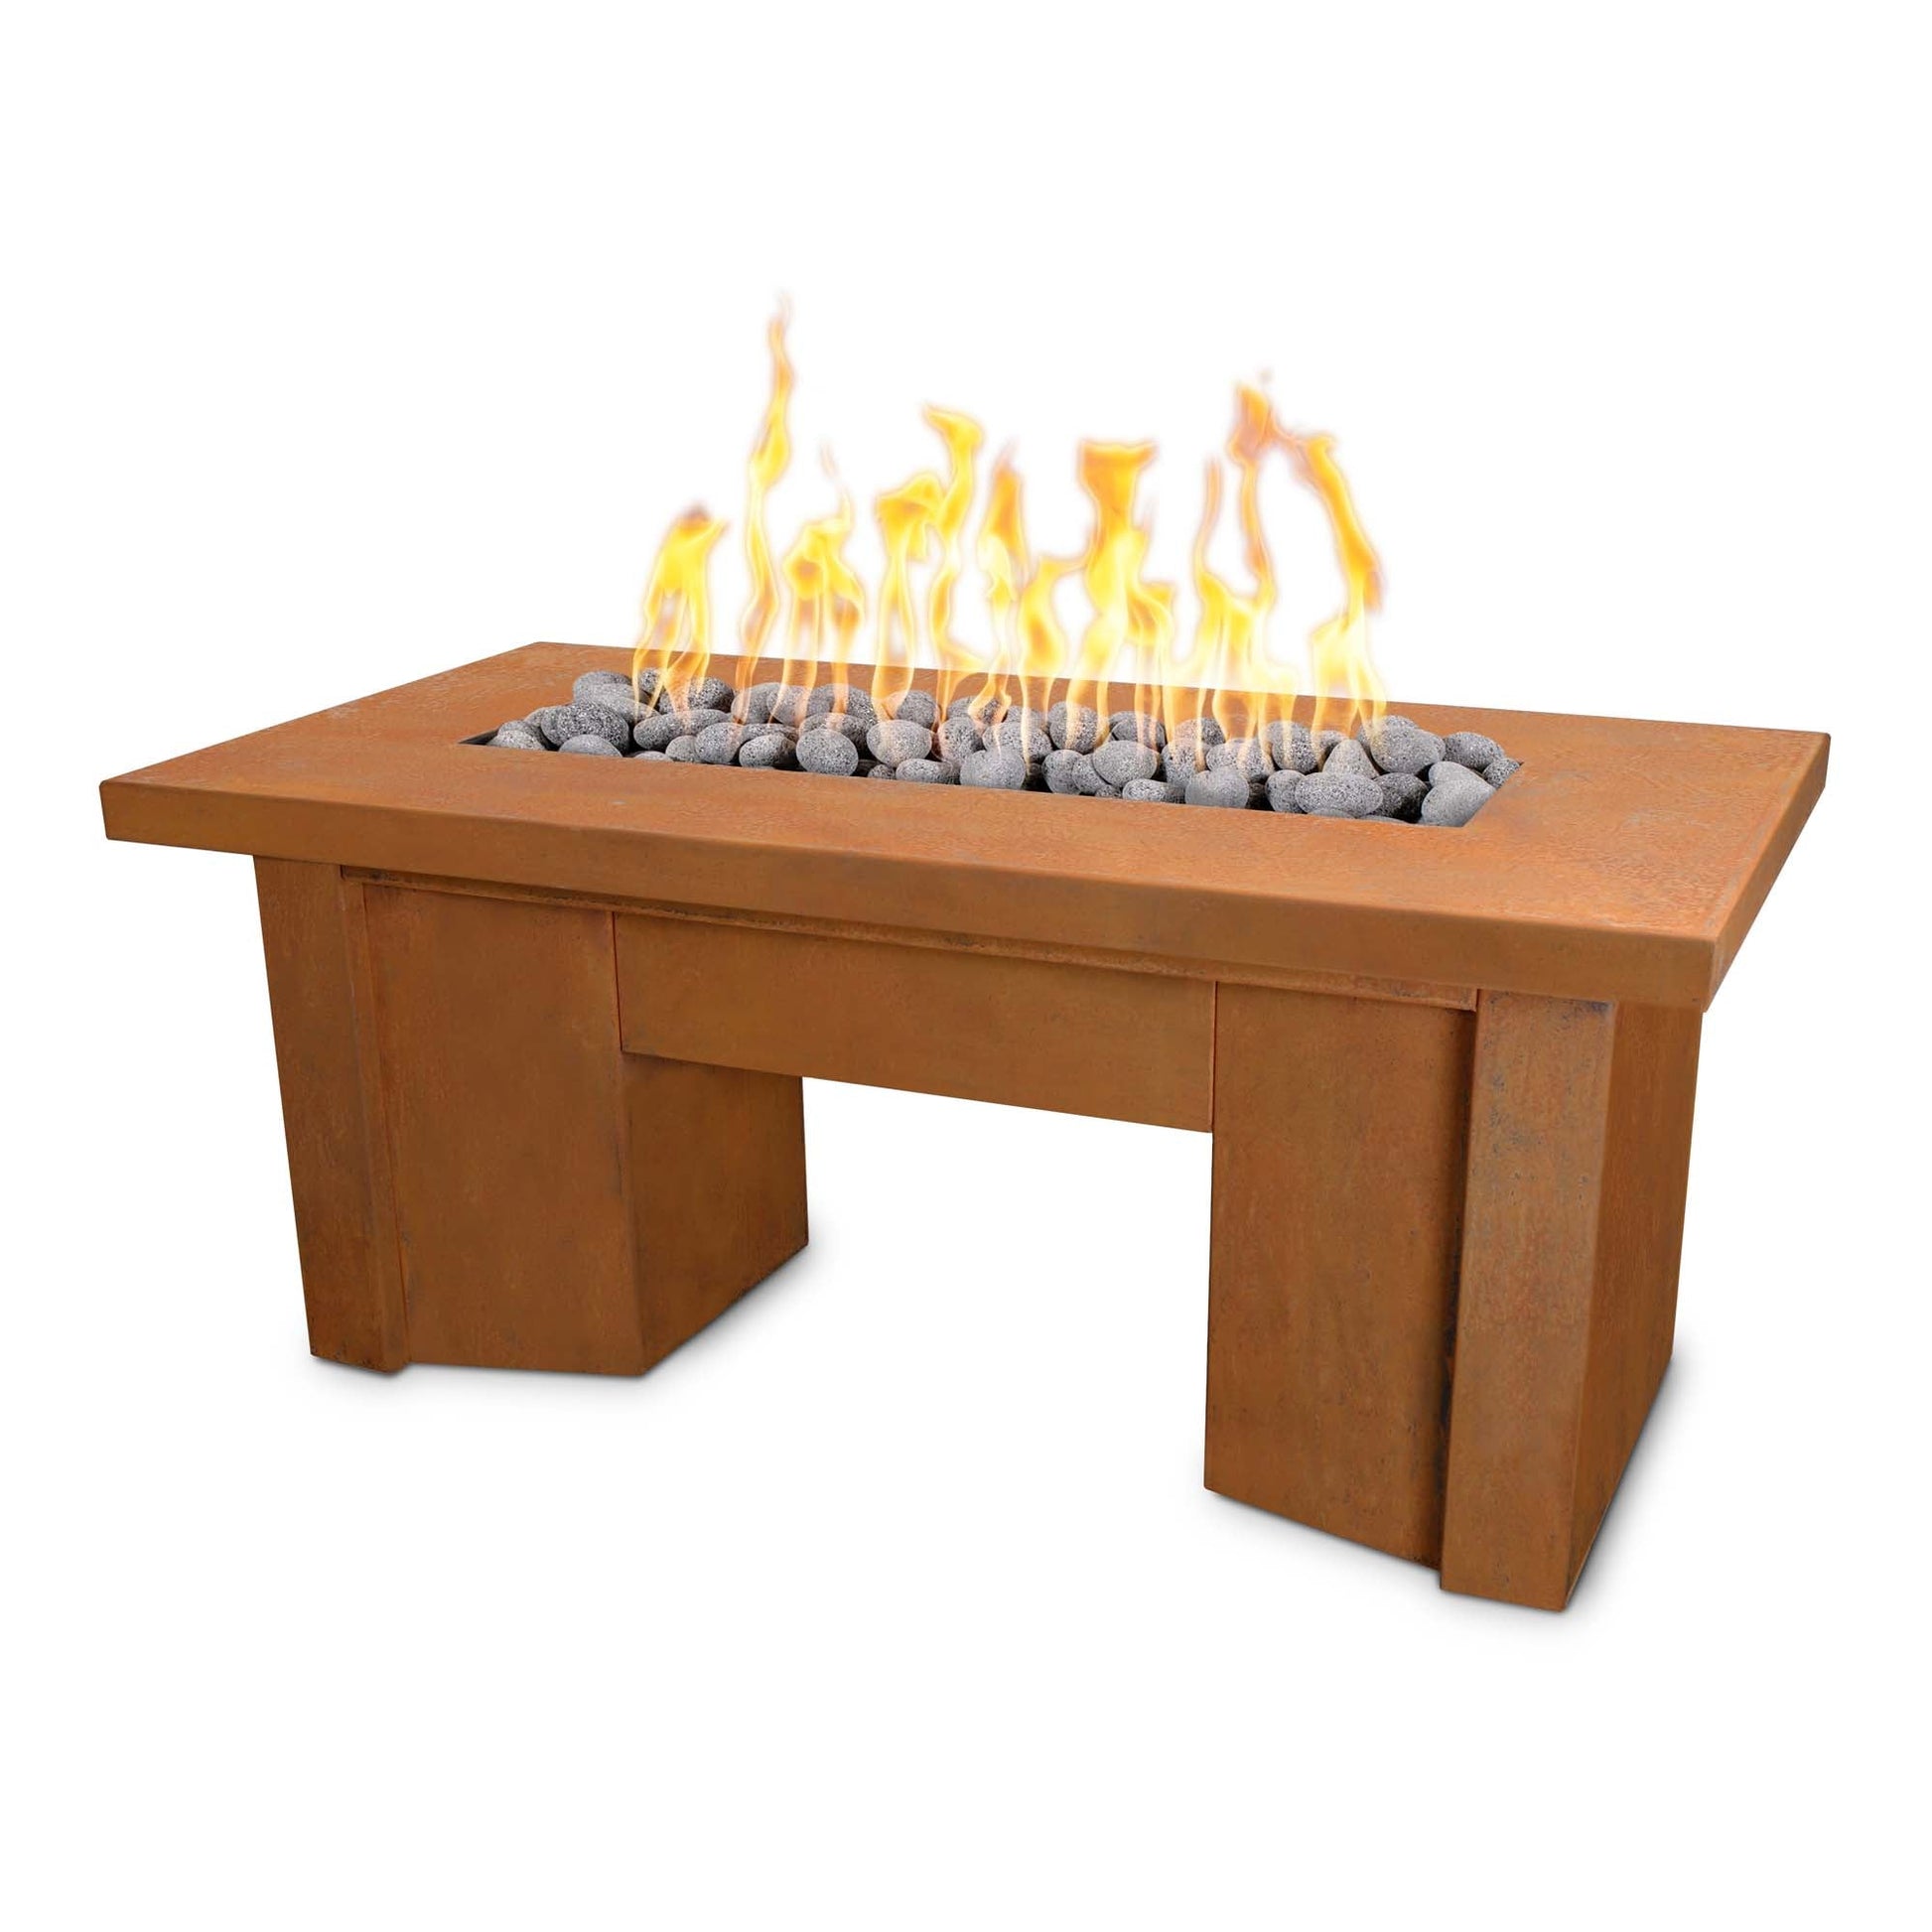 The Outdoor Plus Rectangular Alameda 78" Corten Steel Liquid Propane Fire Pit with Match Lit with Flame Sense Ignition